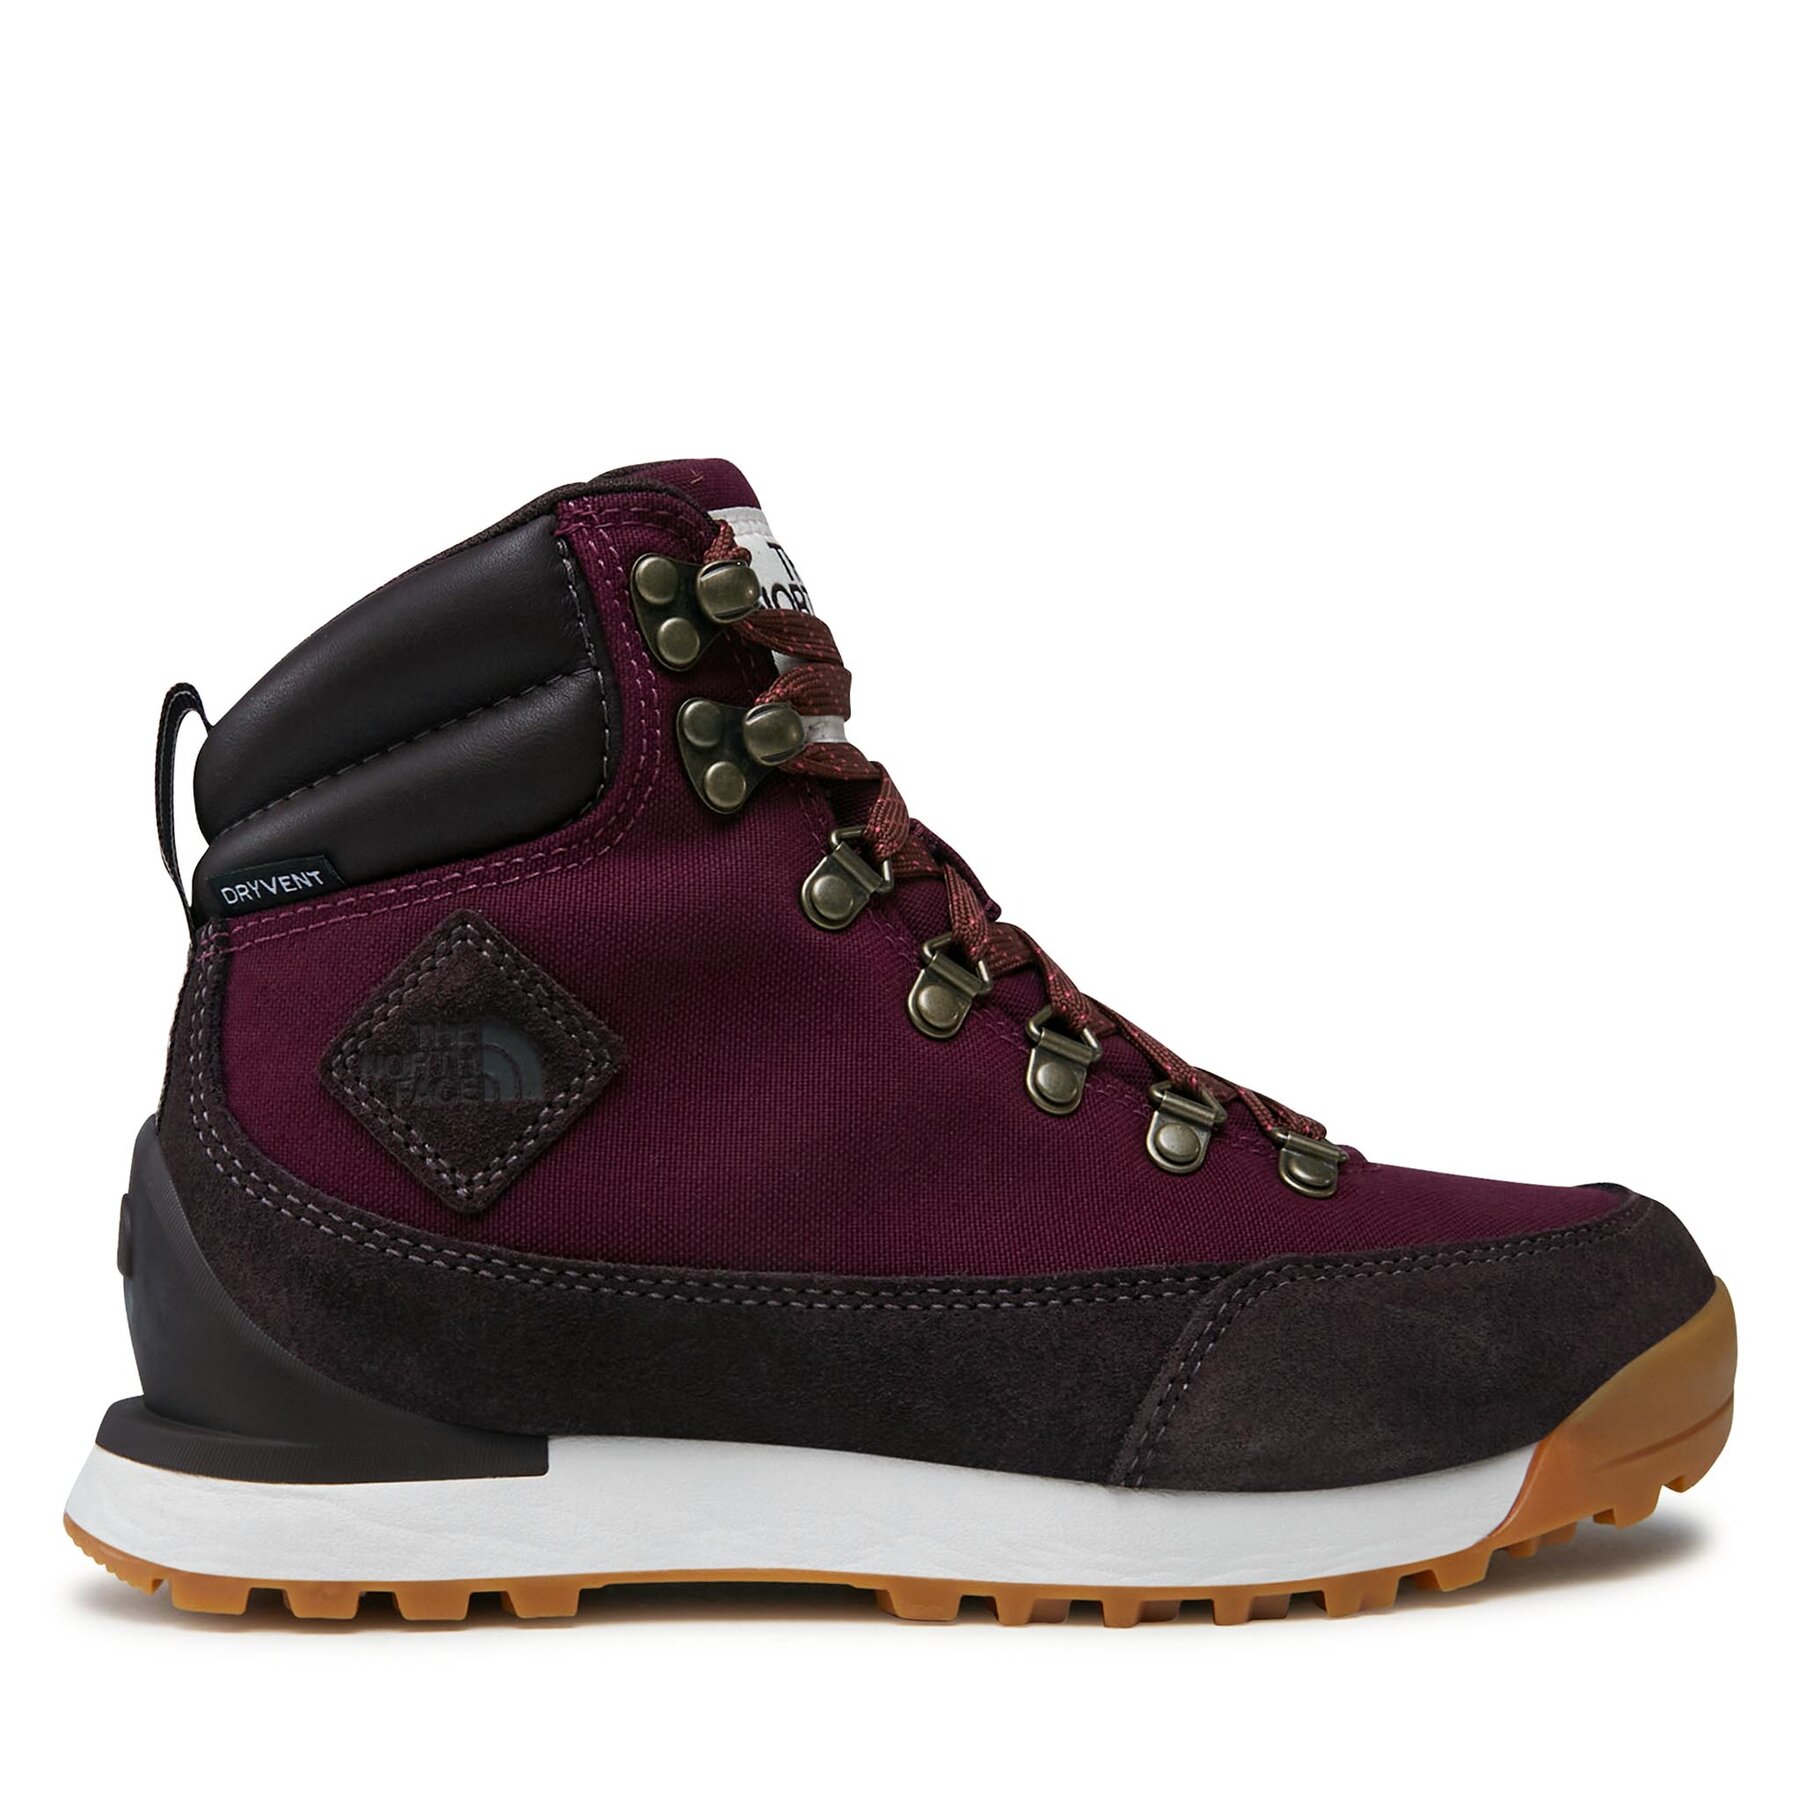 Trekkingschuhe The North Face W Back-To-Berkeley Iv Textile WpNF0A8179OI51 Boysenberry/Coal Brown von The North Face